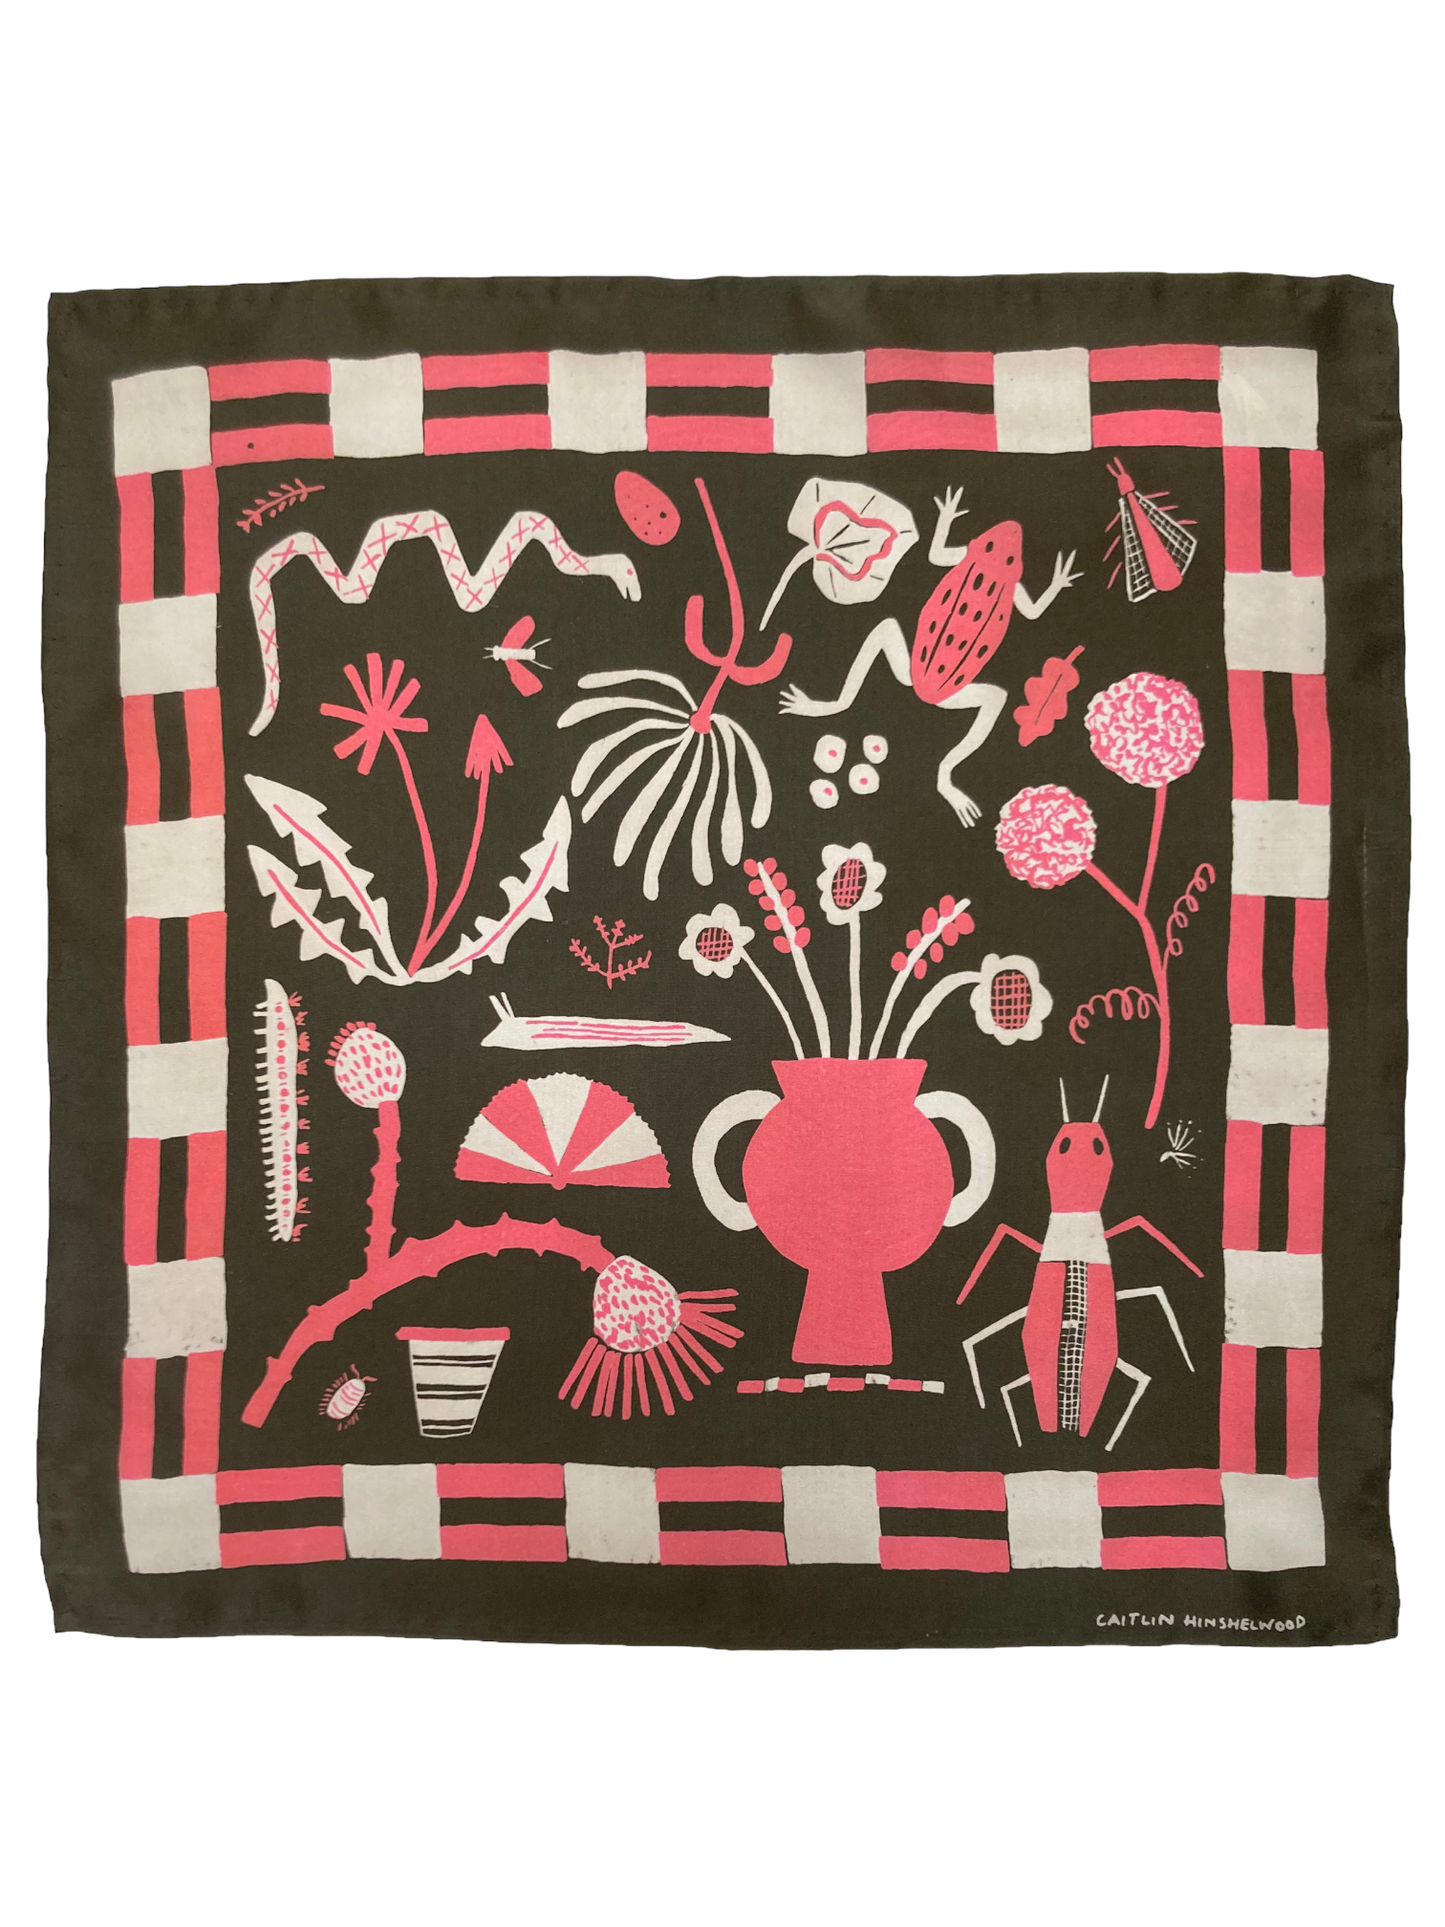 Field Notes Silk Scarf in Black by Caitlin Hinshelwood